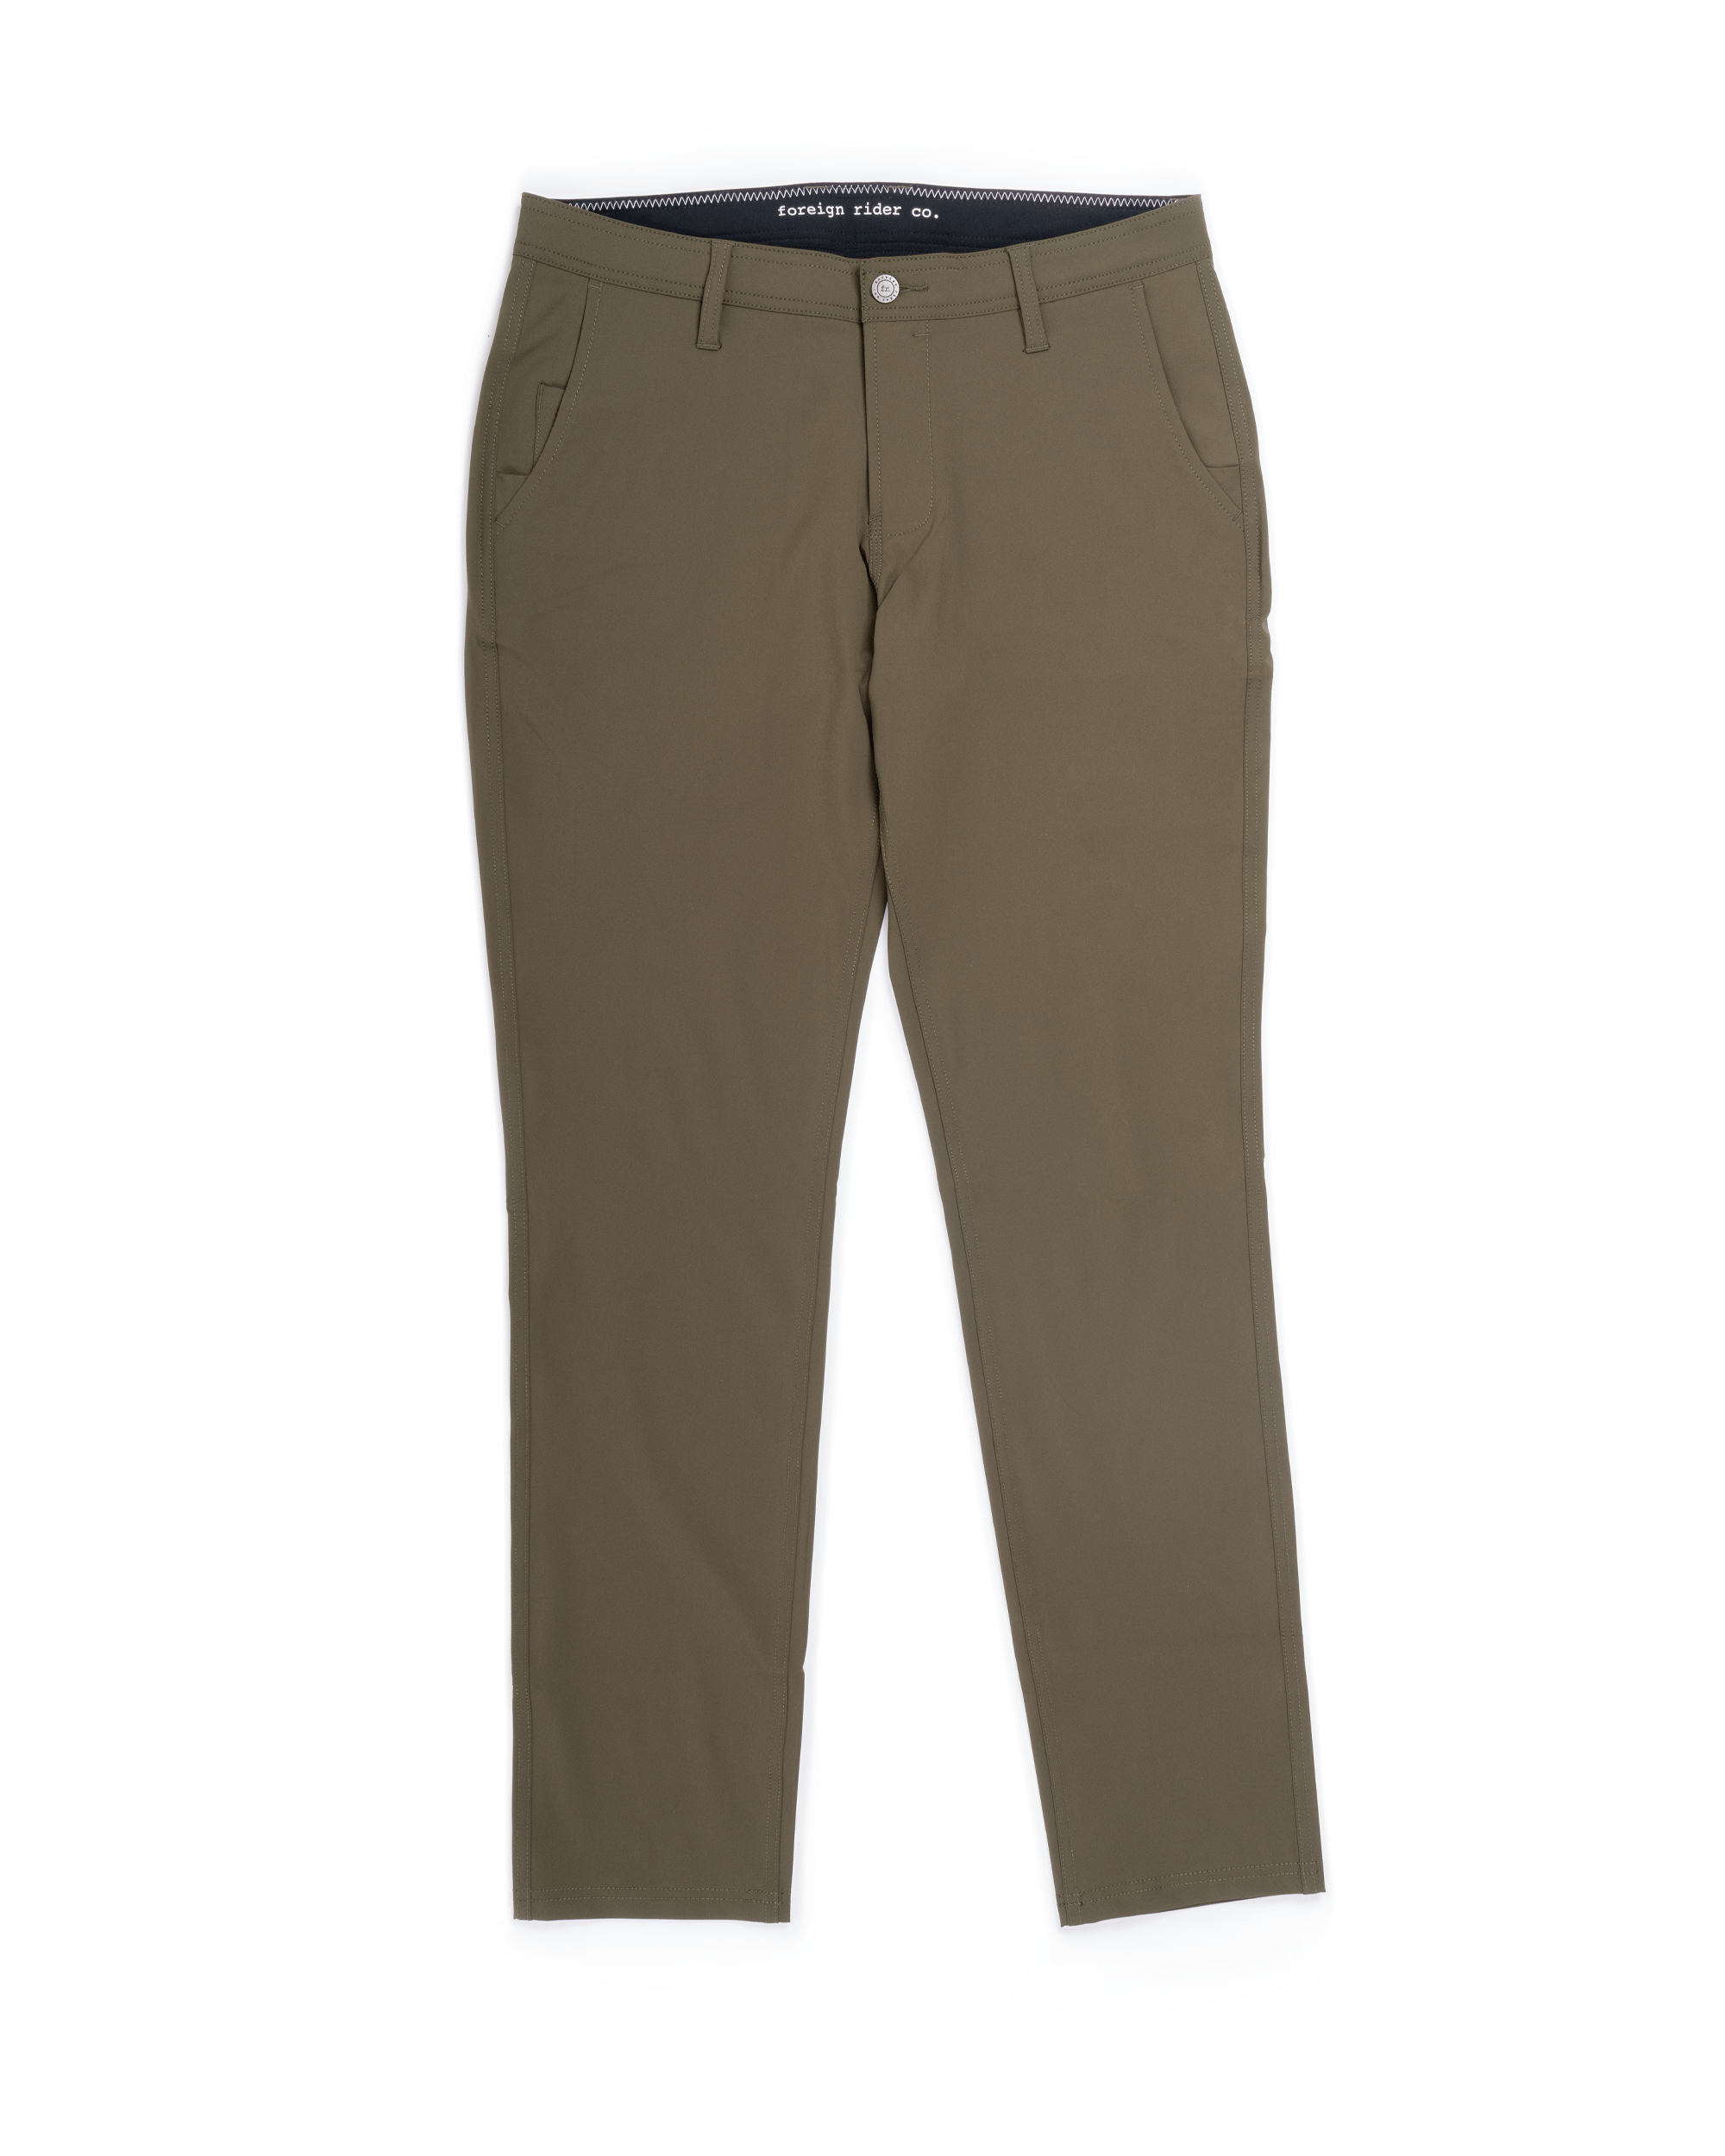 https://www.foreignrider.com/cdn/shop/files/Foreign-Rider-Co-Performance-Pants-Olive-Flatlay_eb1176cd-2c2b-489b-ab35-ac1bf4e10efe.png?v=1702678091&width=2000